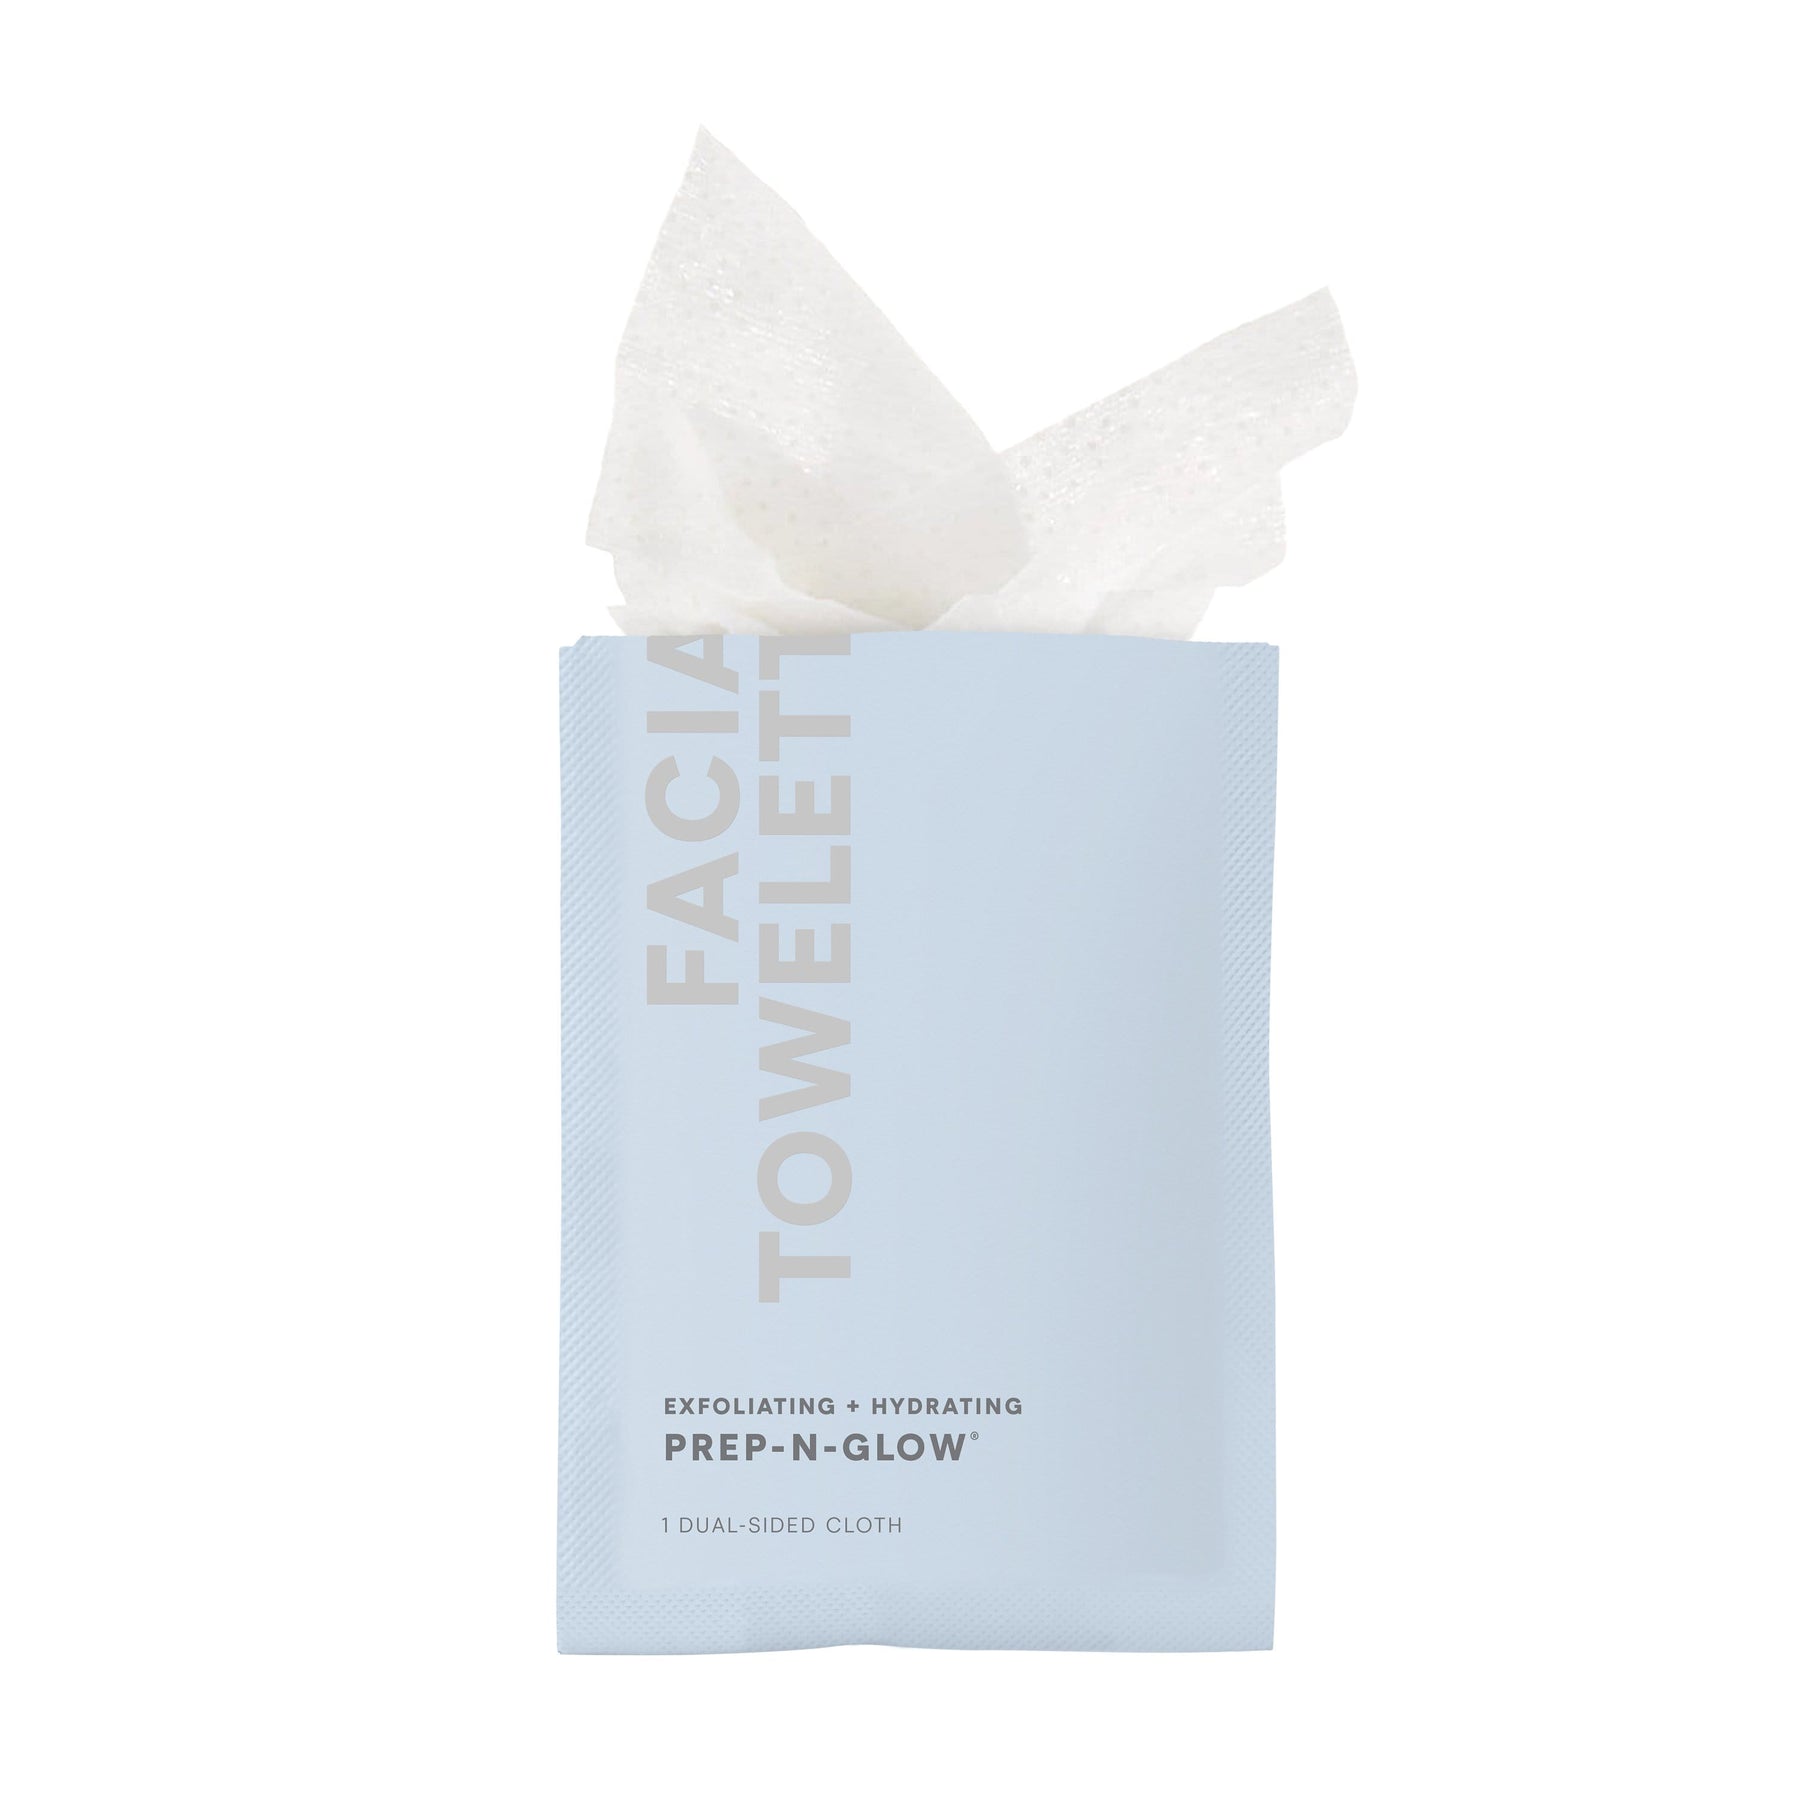 Prep-N-Glow® Exfoliating Face Wipes, Cleansing Cloths